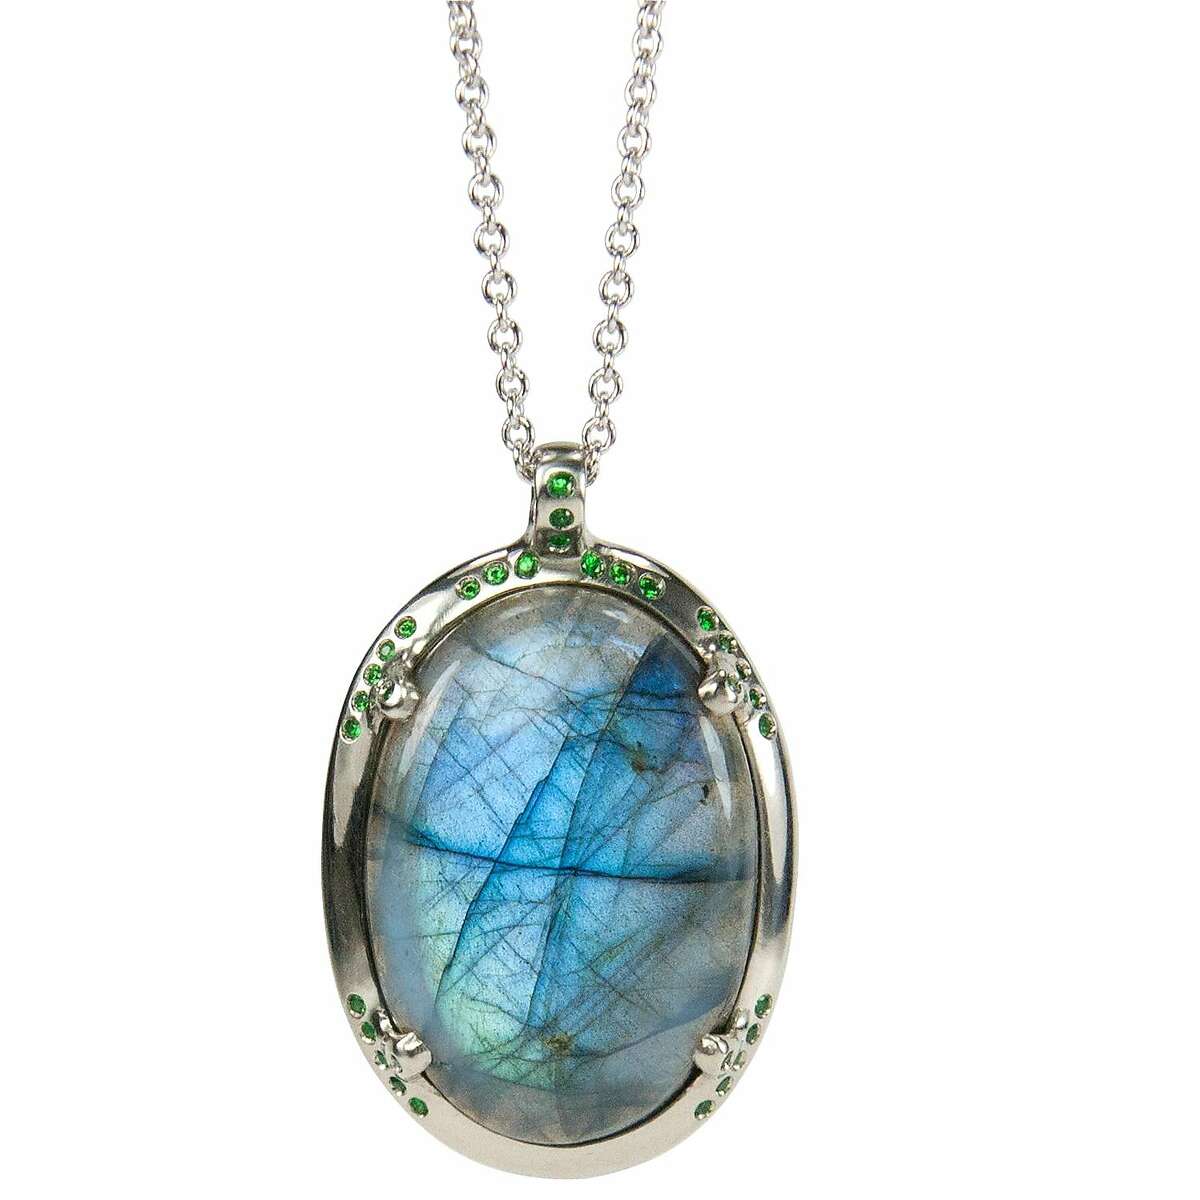 �Labradorites are a gorgeous and vibrant gem, and one of my favorite custom pieces is this pendant with a labradorite cabochon and tsavorites that I designed for a client who wanted something bold, dramatic and elegant," says the Poet and/the Bench owner Jeffrey Levin. ( Price upon request)